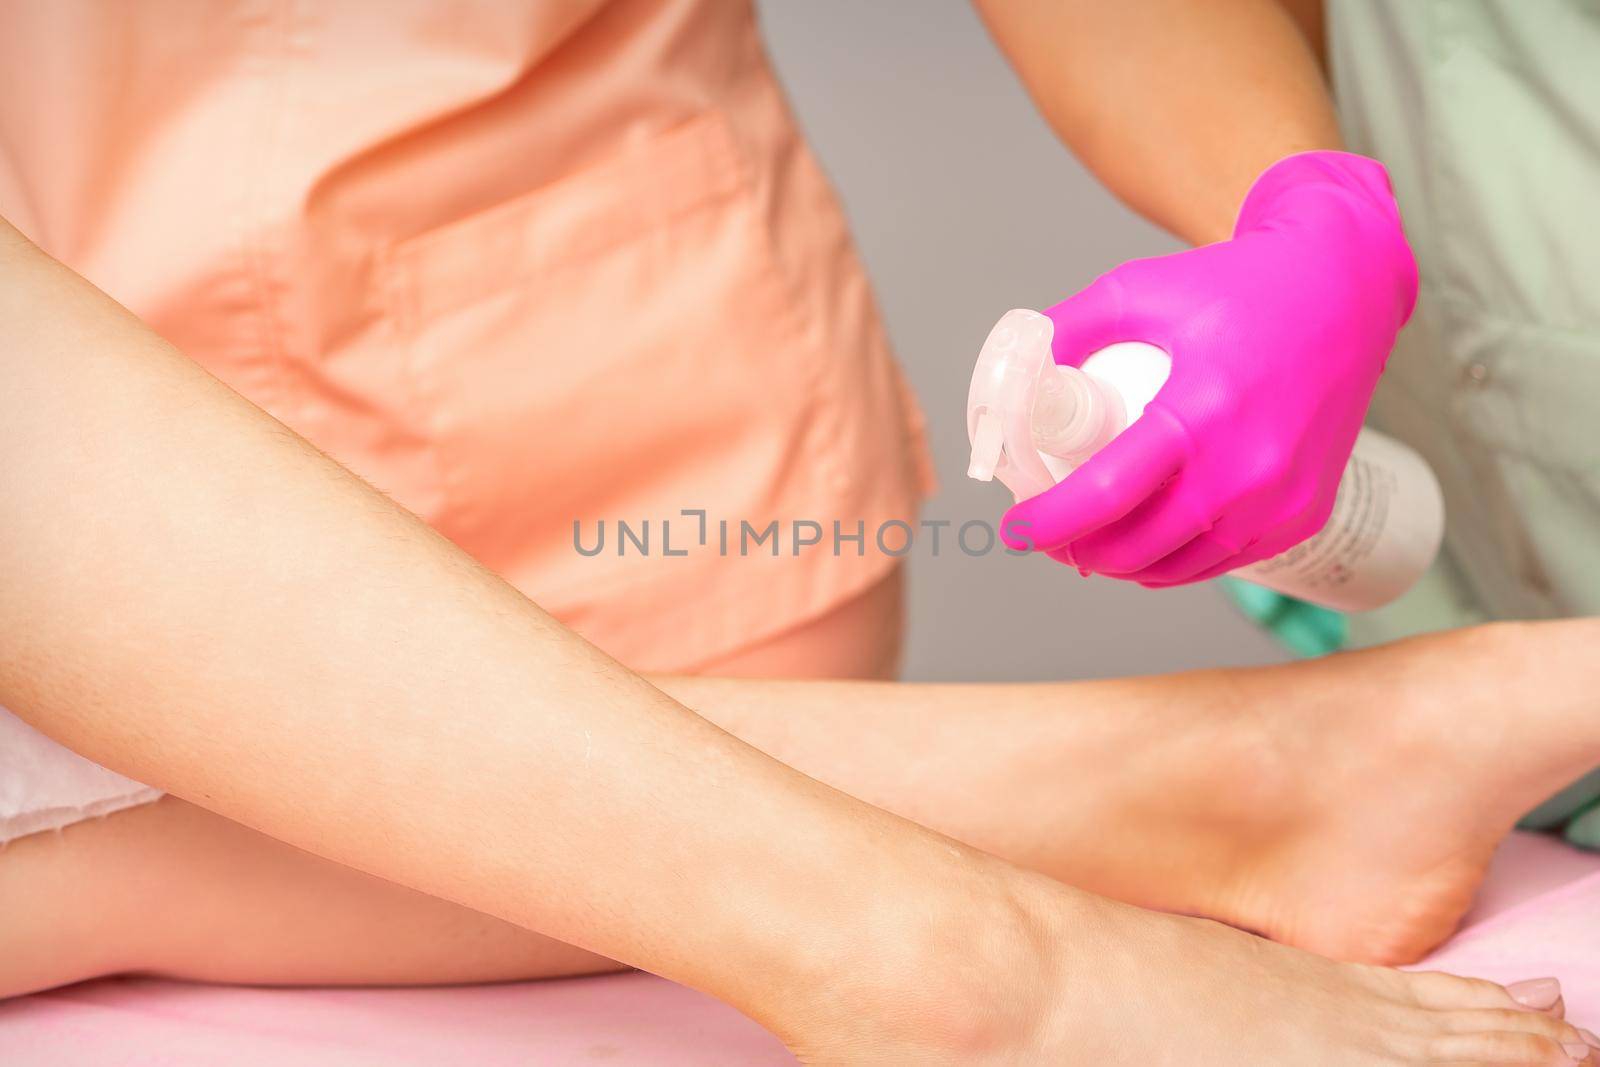 A beautician sprays a disinfectant on the feet of a young woman before the epilation procedure. Foot depilation. by okskukuruza